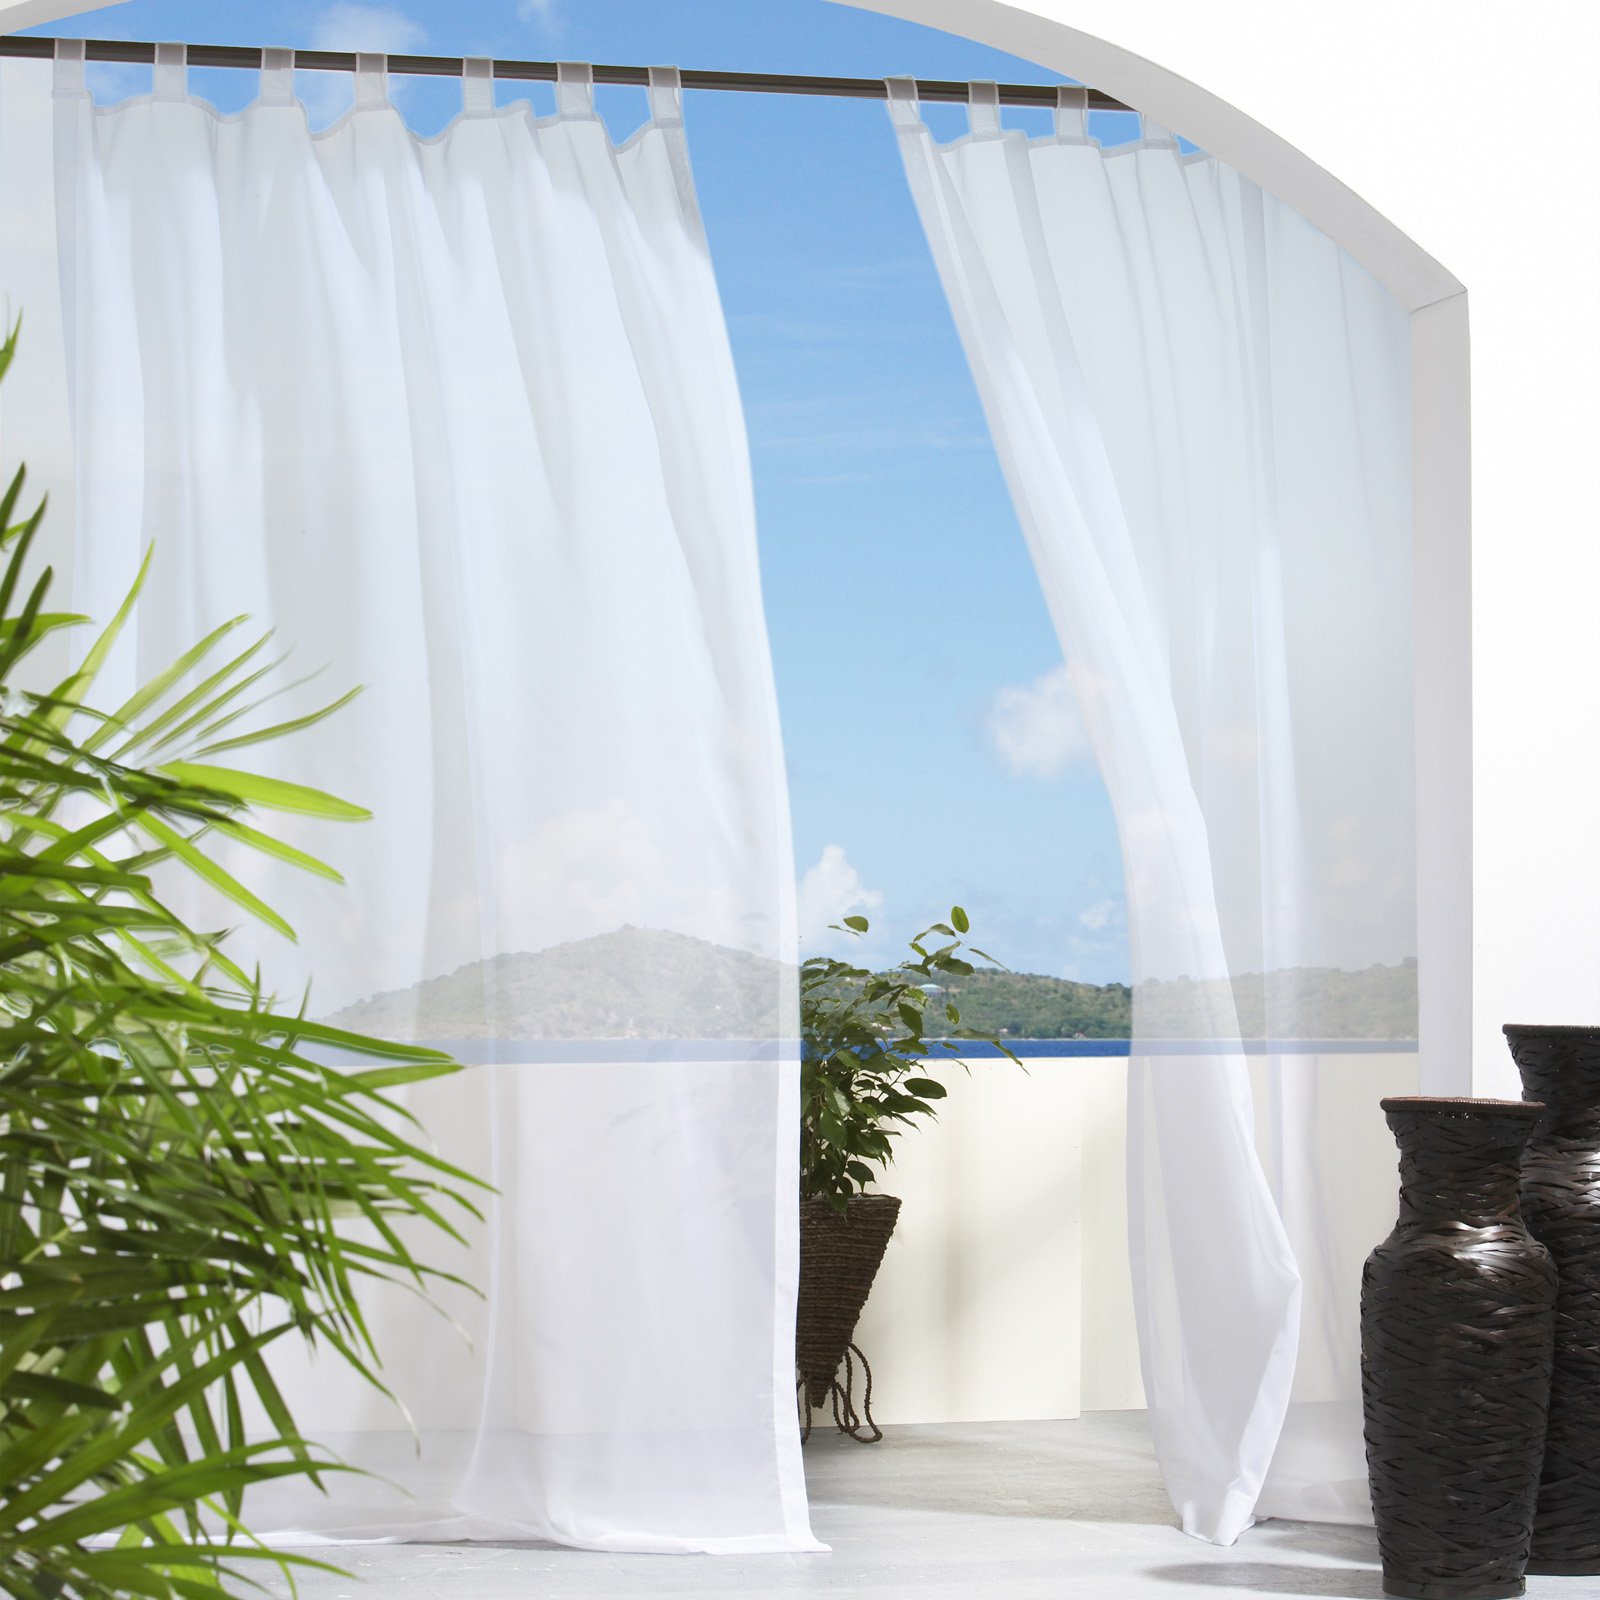 3 Gorgeous Outdoor Curtains –And What They’ll Do for Your Home! | Hawk